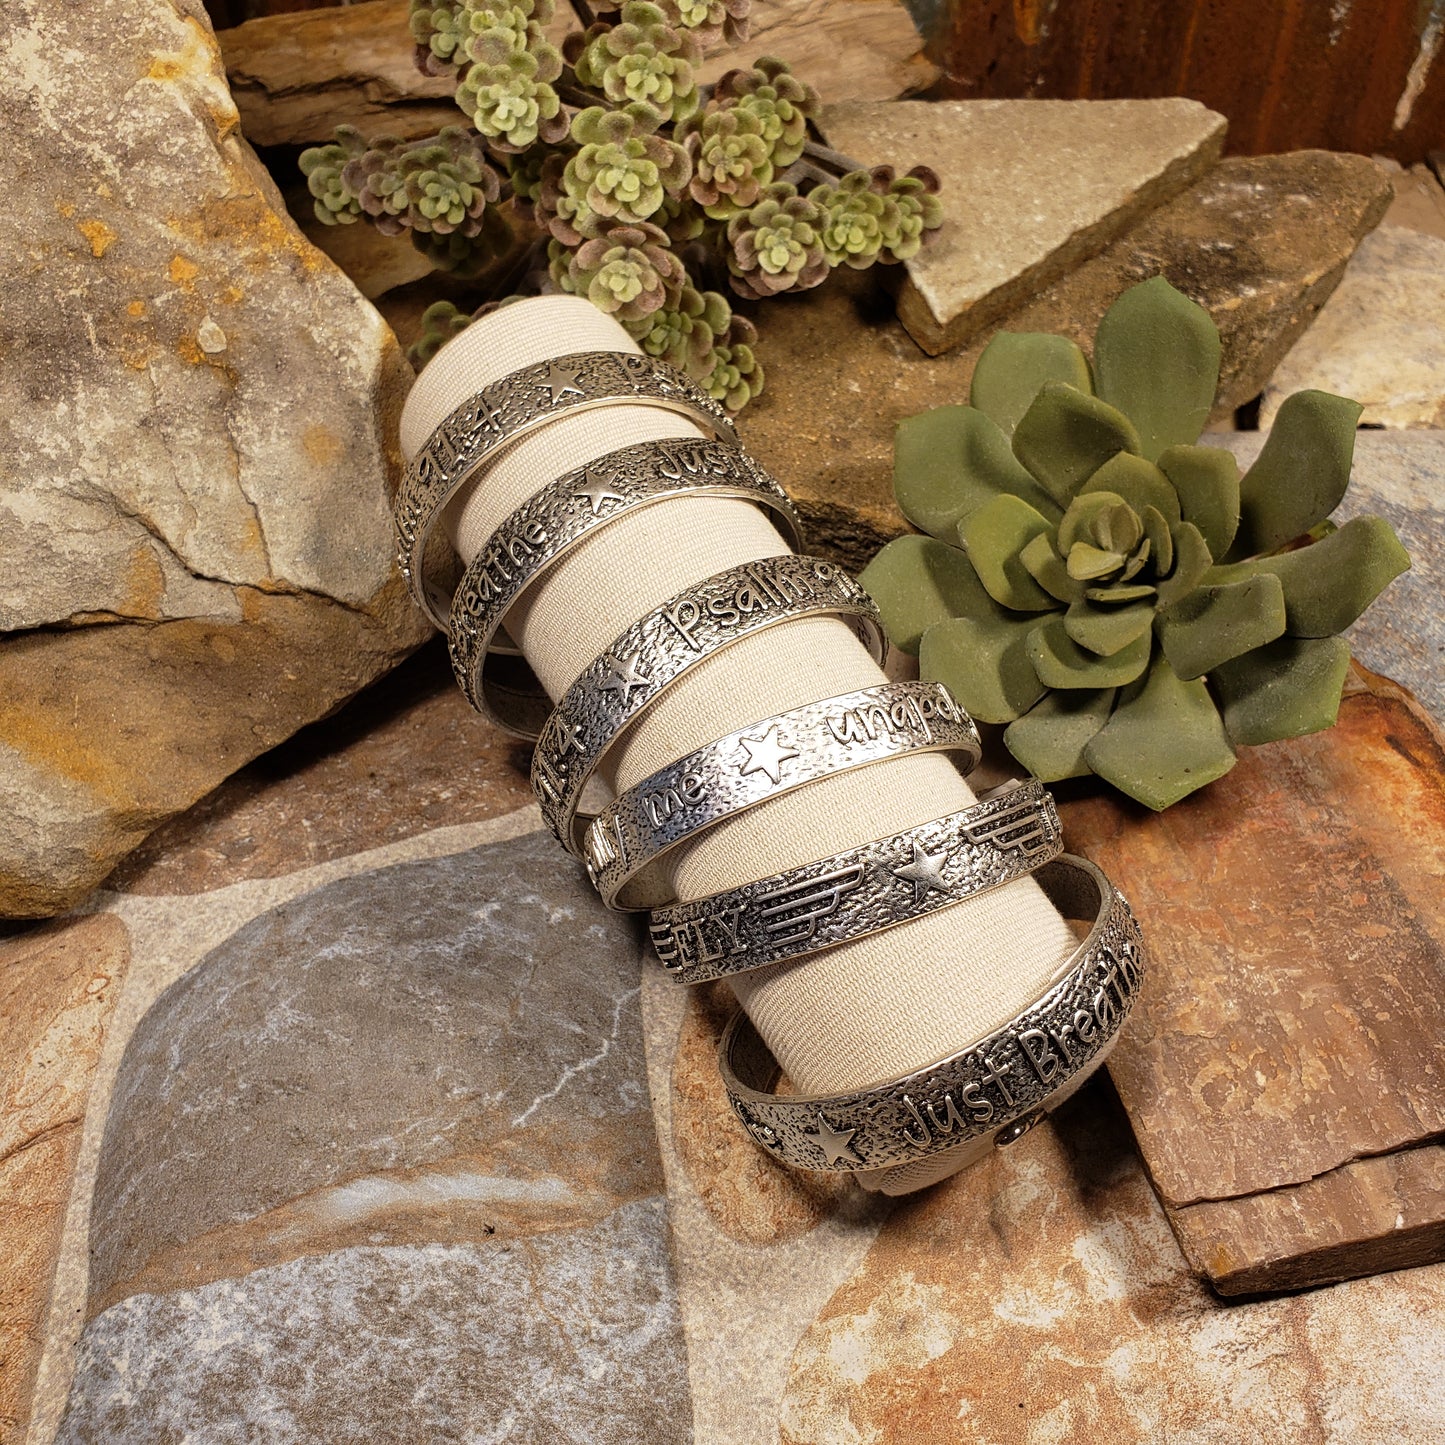 Silver Unapologetically Me Bangle Bracelet